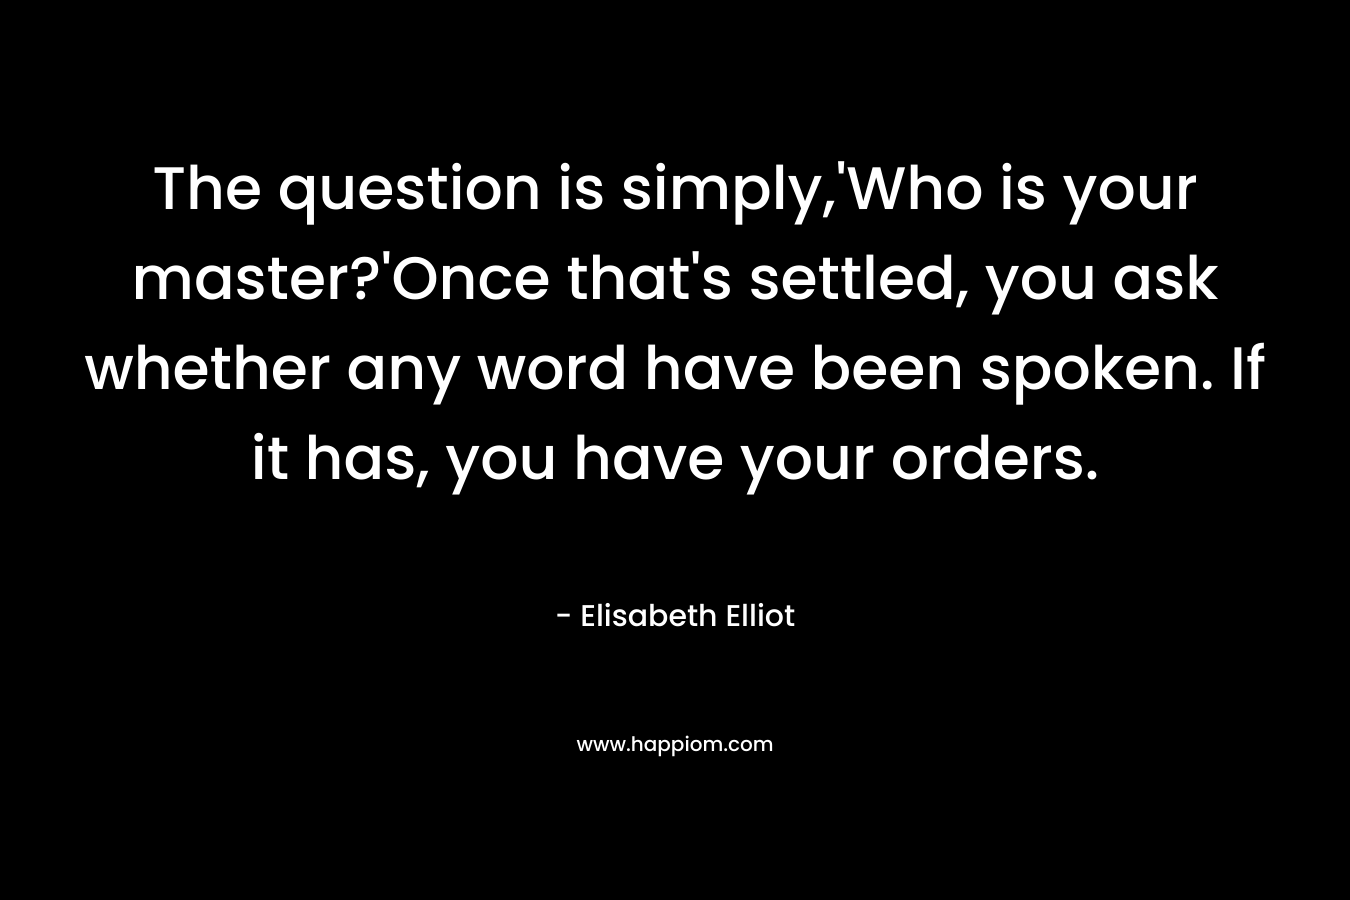 The question is simply,'Who is your master?'Once that's settled, you ask whether any word have been spoken. If it has, you have your orders.